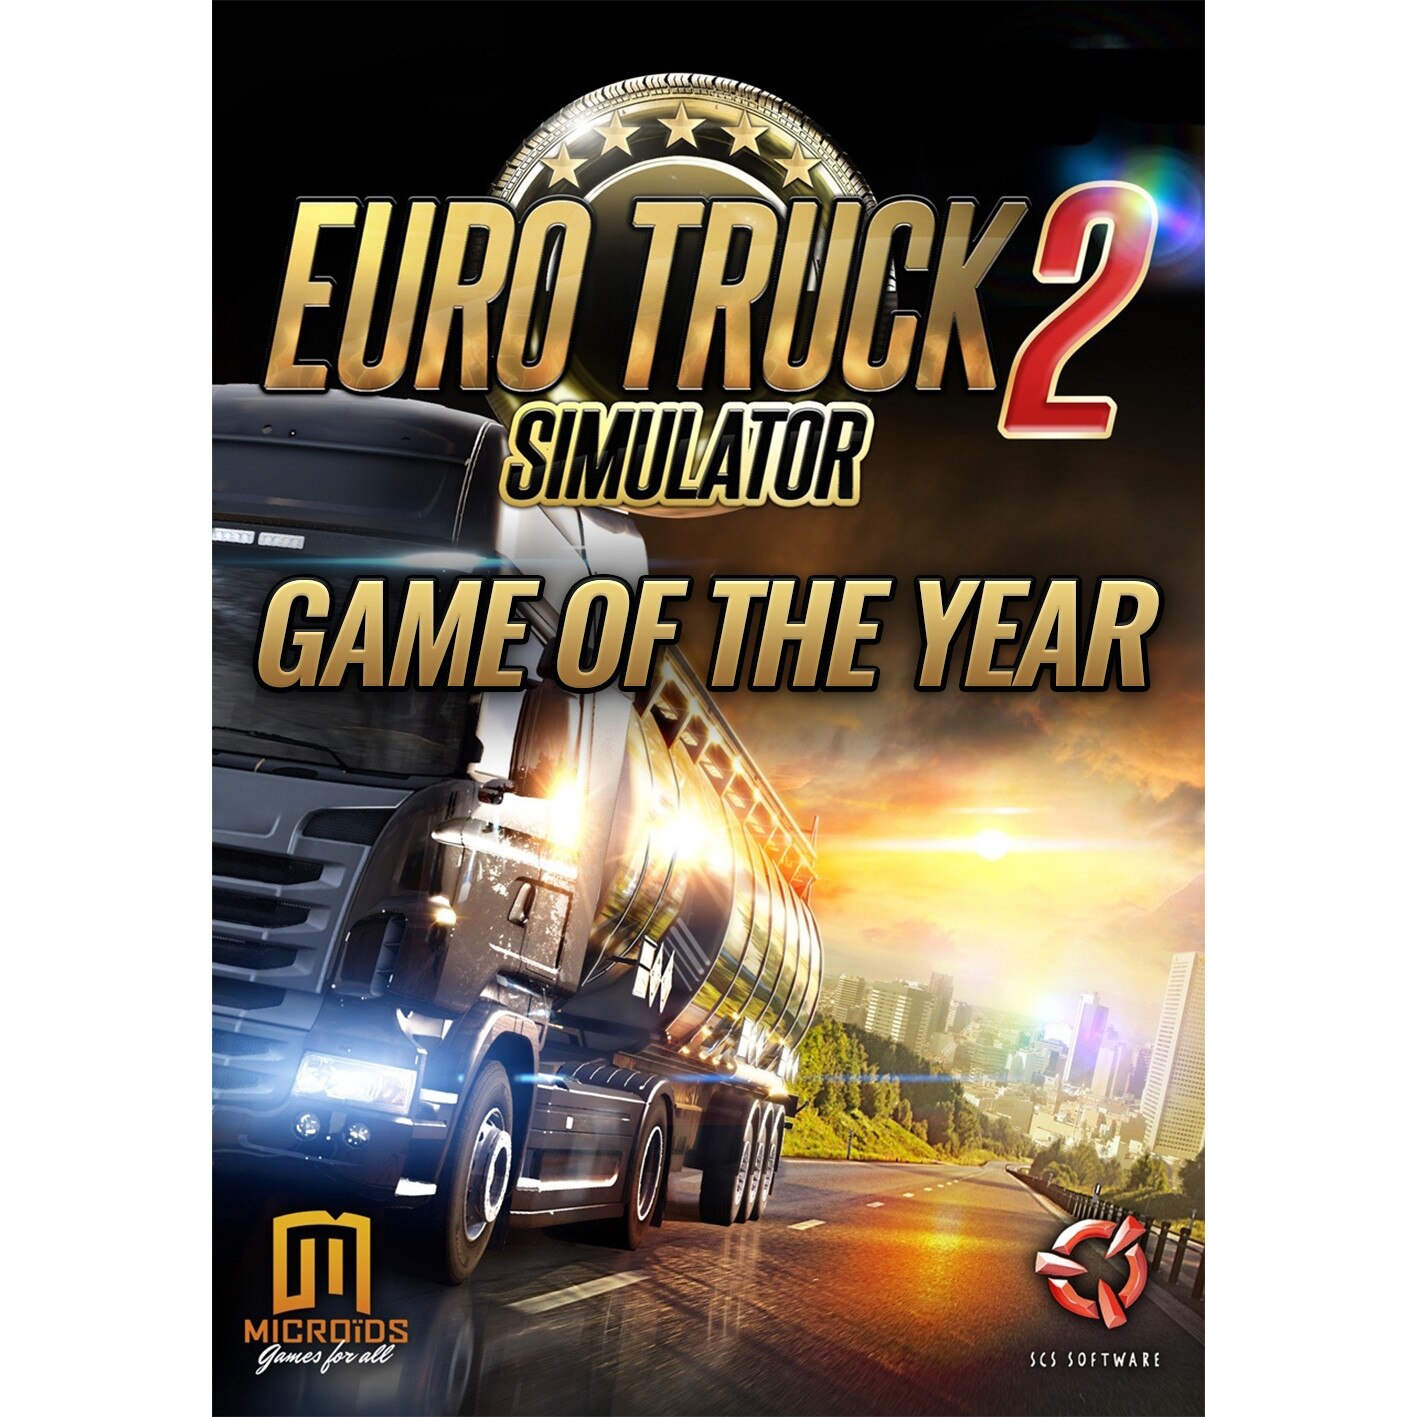 Euro Truck Simulator 2 Game of The Year Edition (GOTY) PC Steam